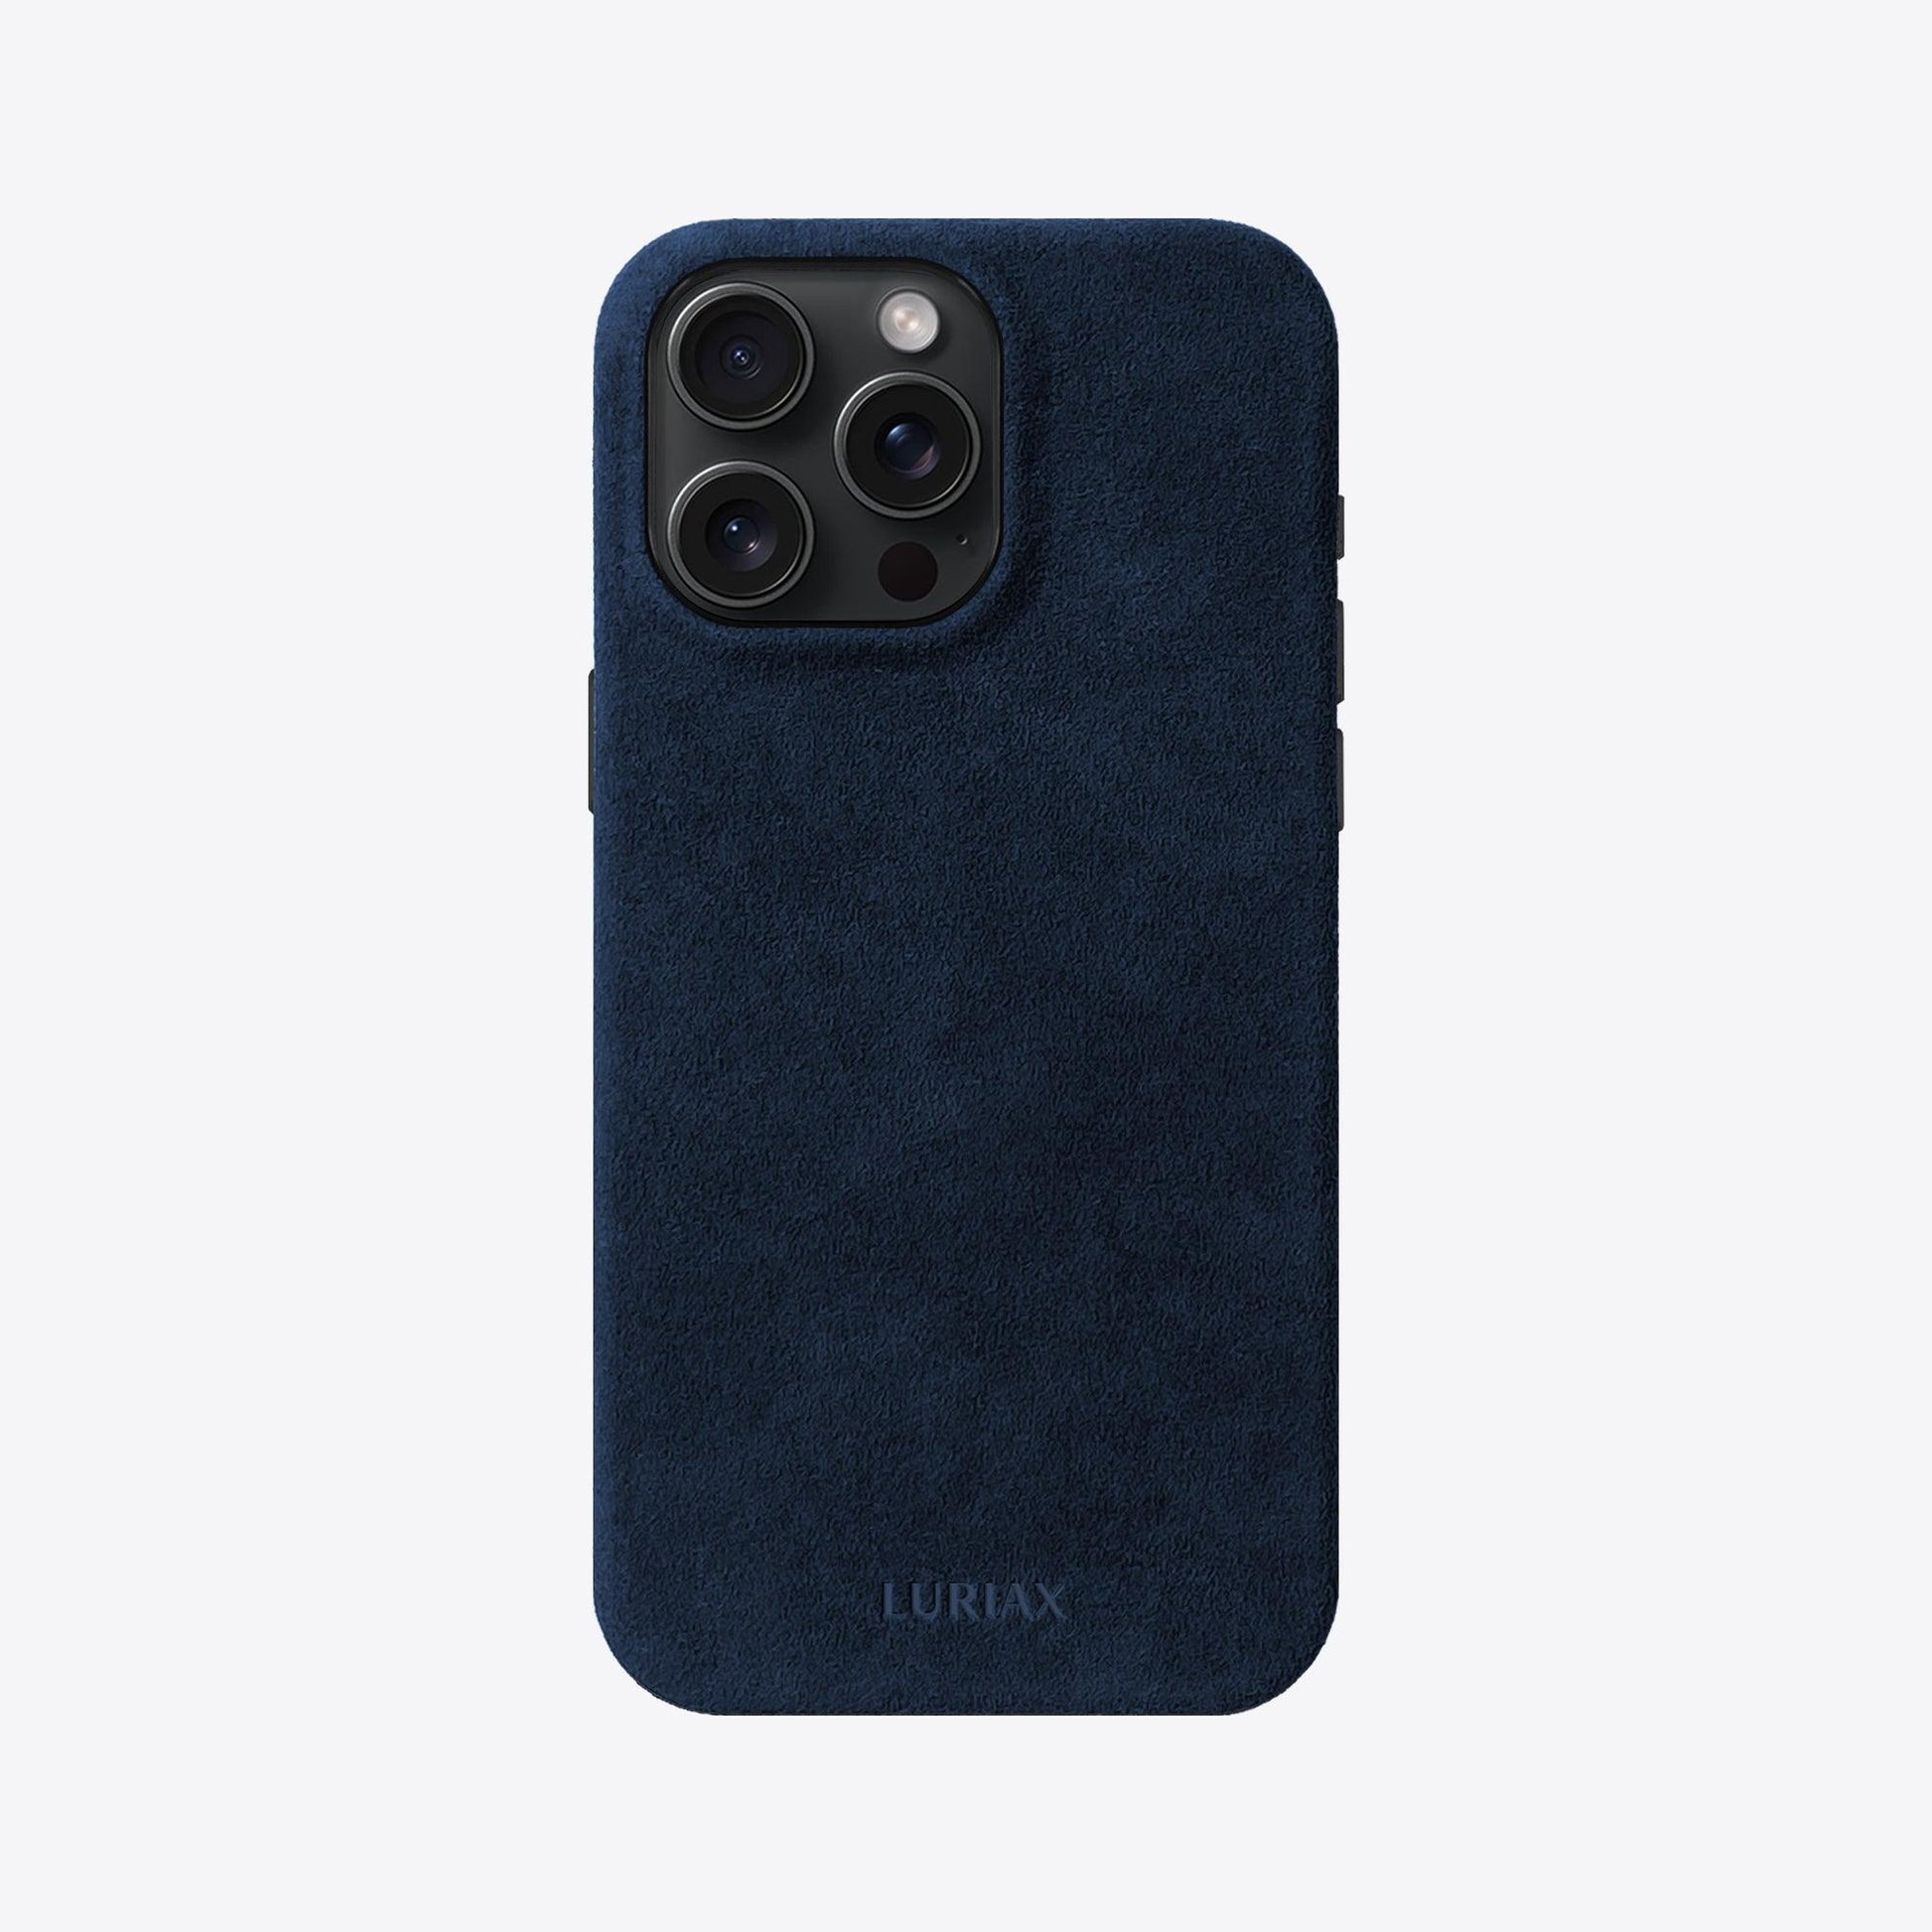 Alcantara Suede Leather iPhone Case and Accessories Collection - The Classic iPhone Case V2 - Dark Blue - Luriax